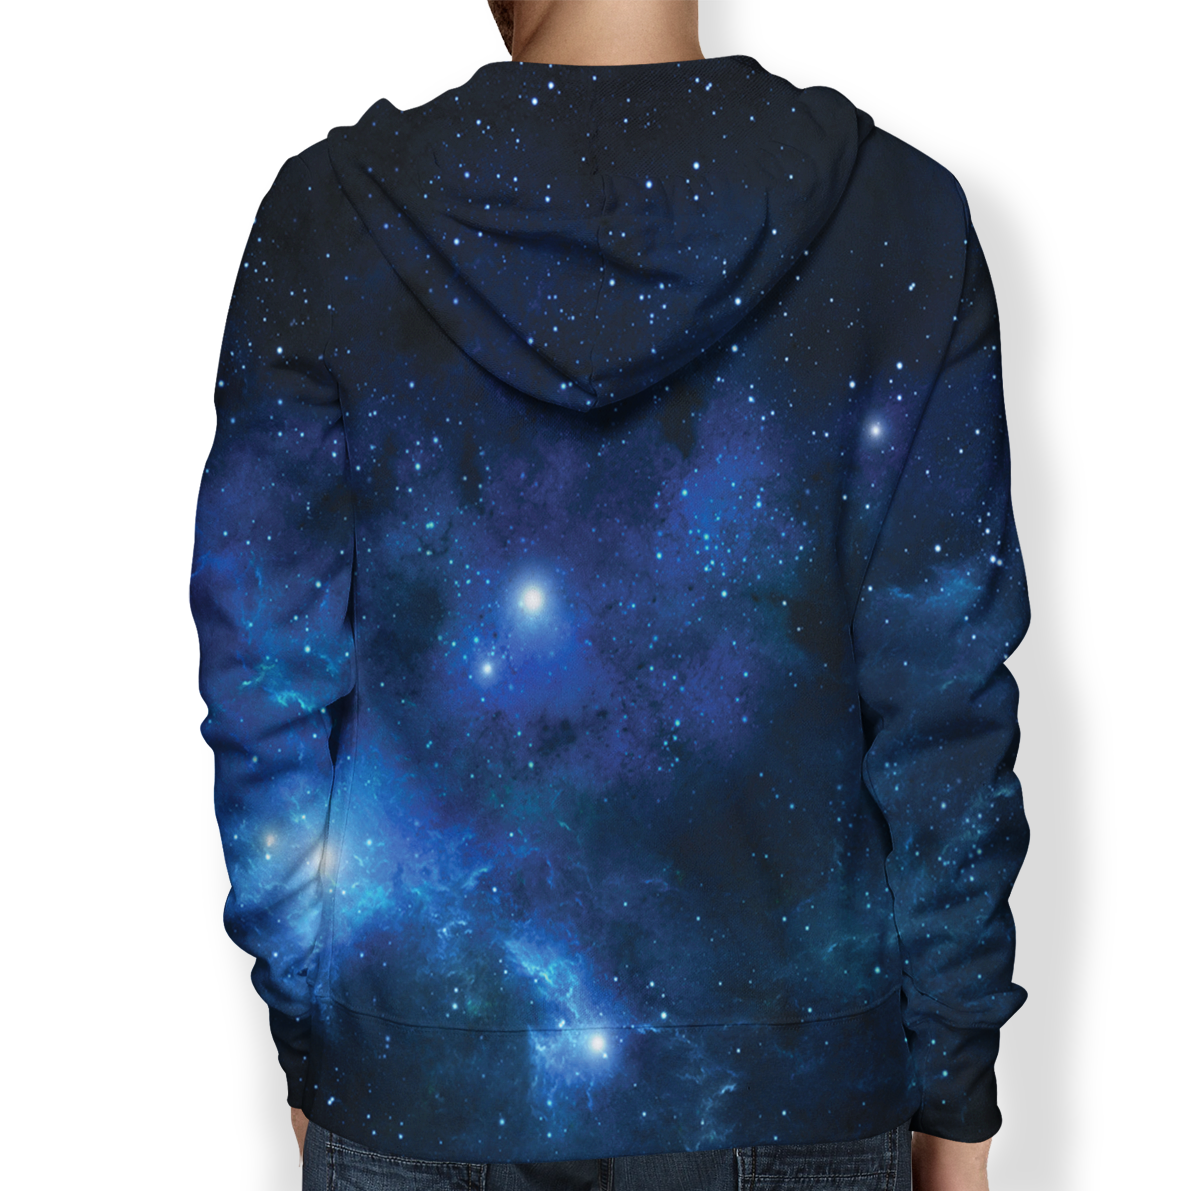 Maine Coon Cat Galaxy Hoodie V1